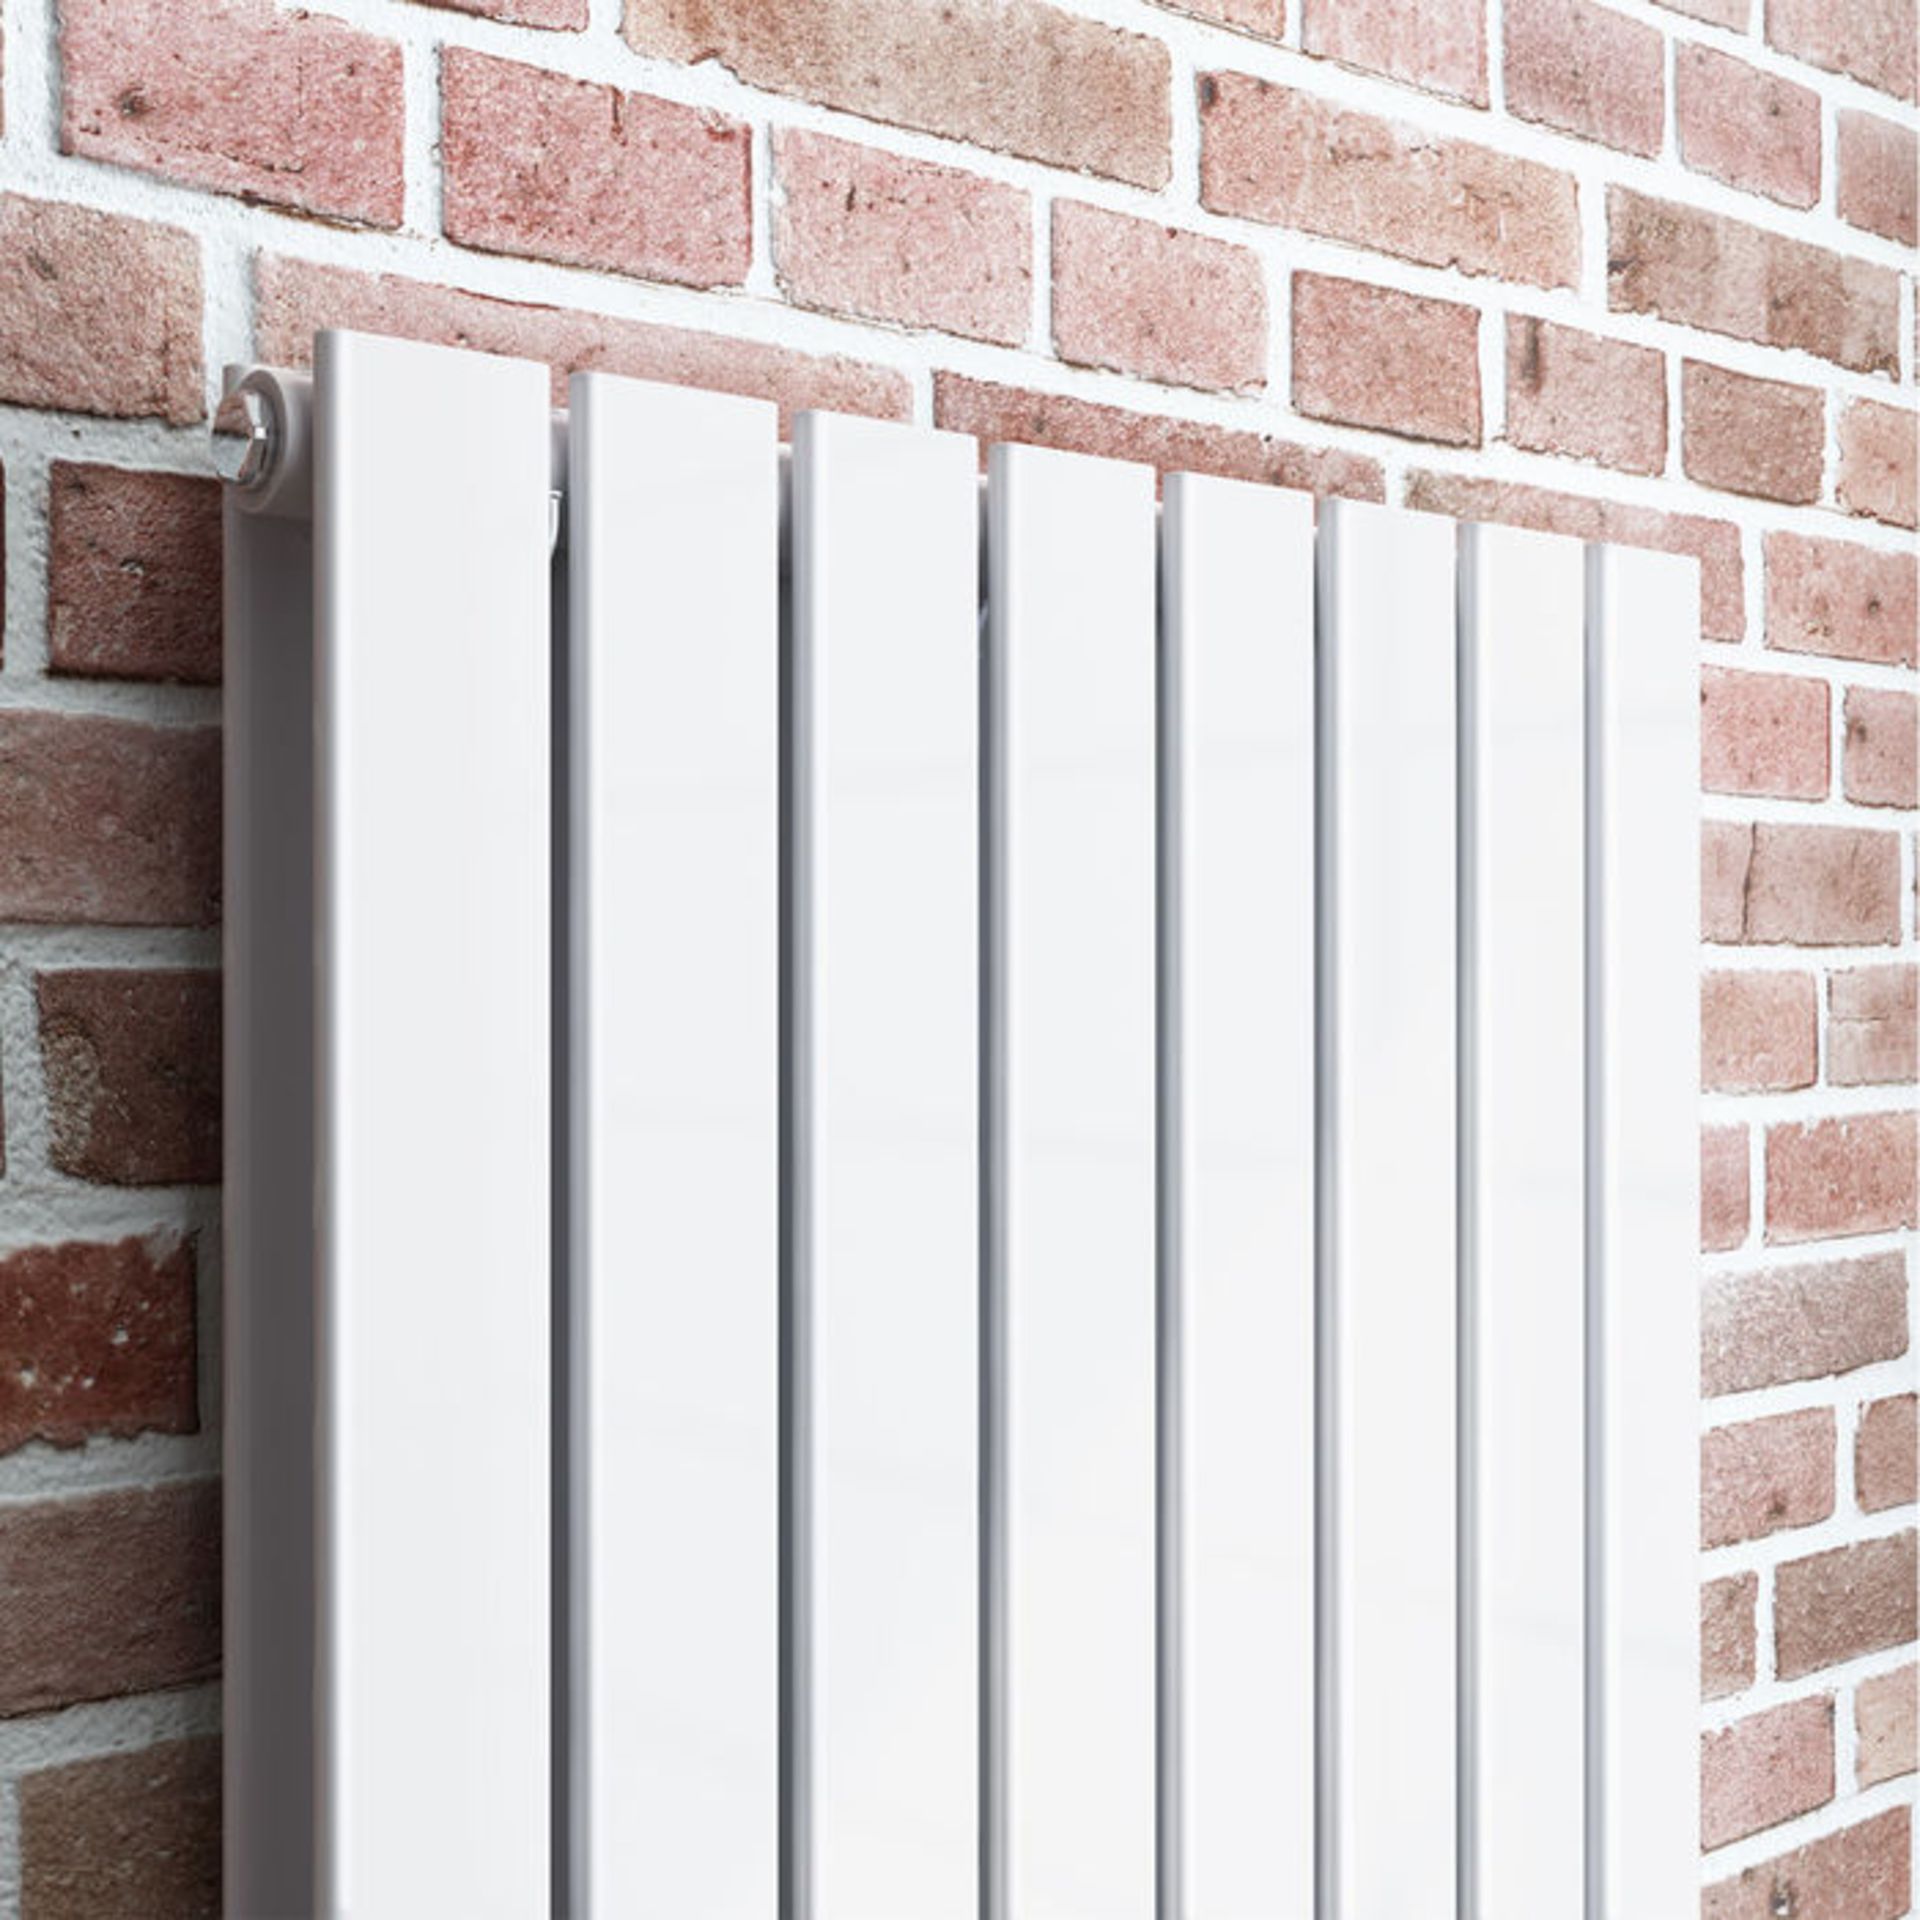 (LP20) 1800x608mm Gloss White Double Flat Panel Vertical Radiator - Premium. RRP £499.99. Made - Image 3 of 4